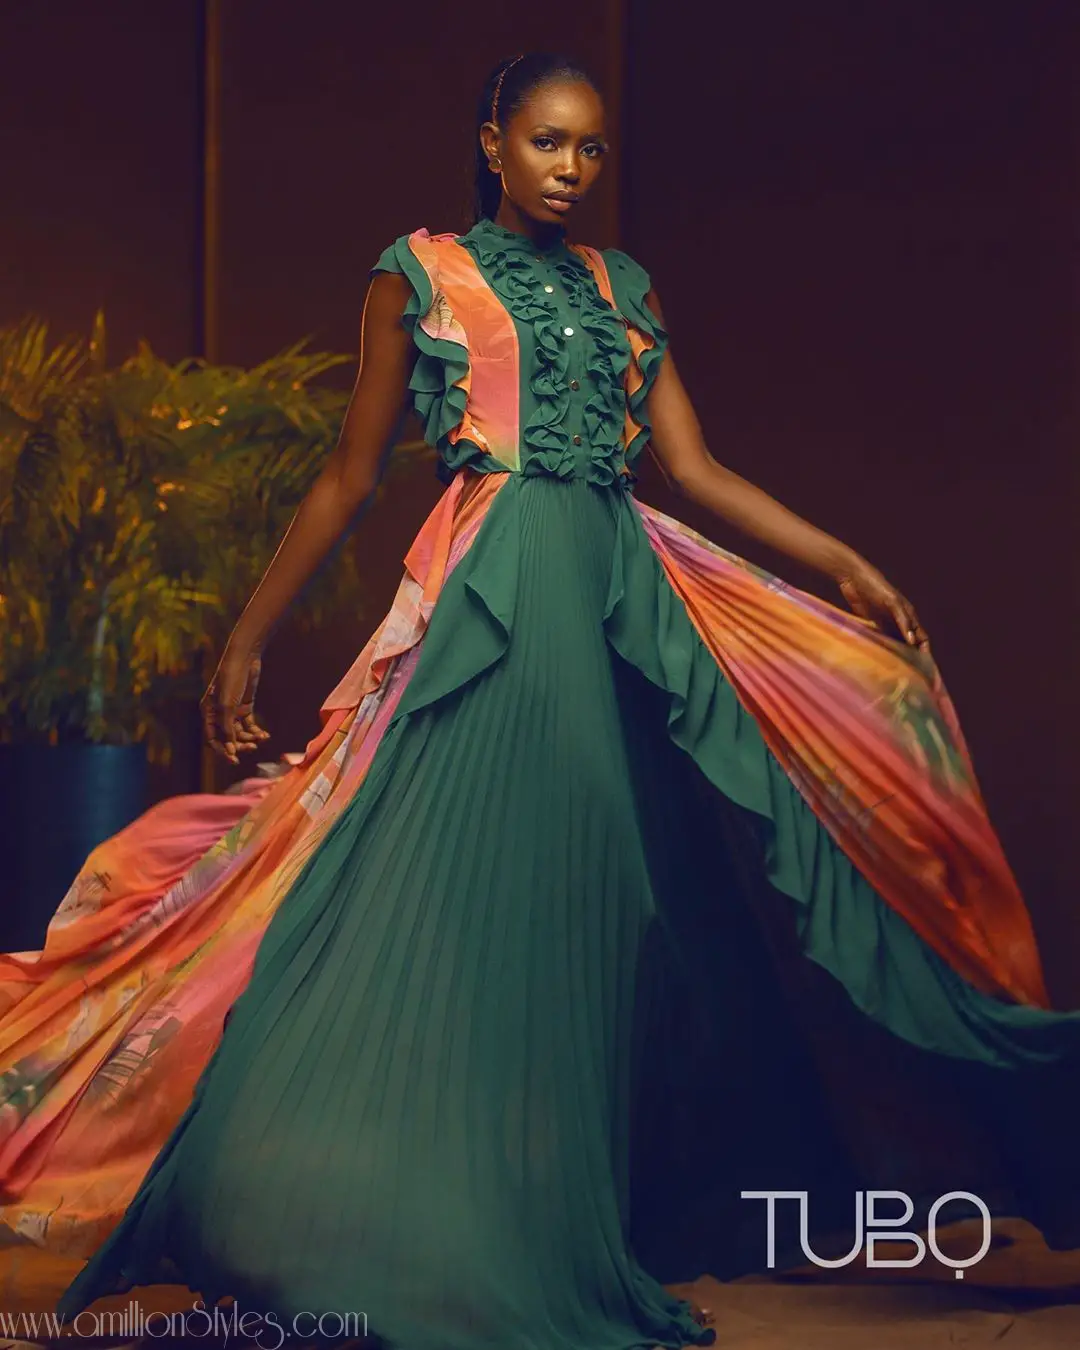 Tubo's Ready To Wear Colorful Pieces Are Must Haves!